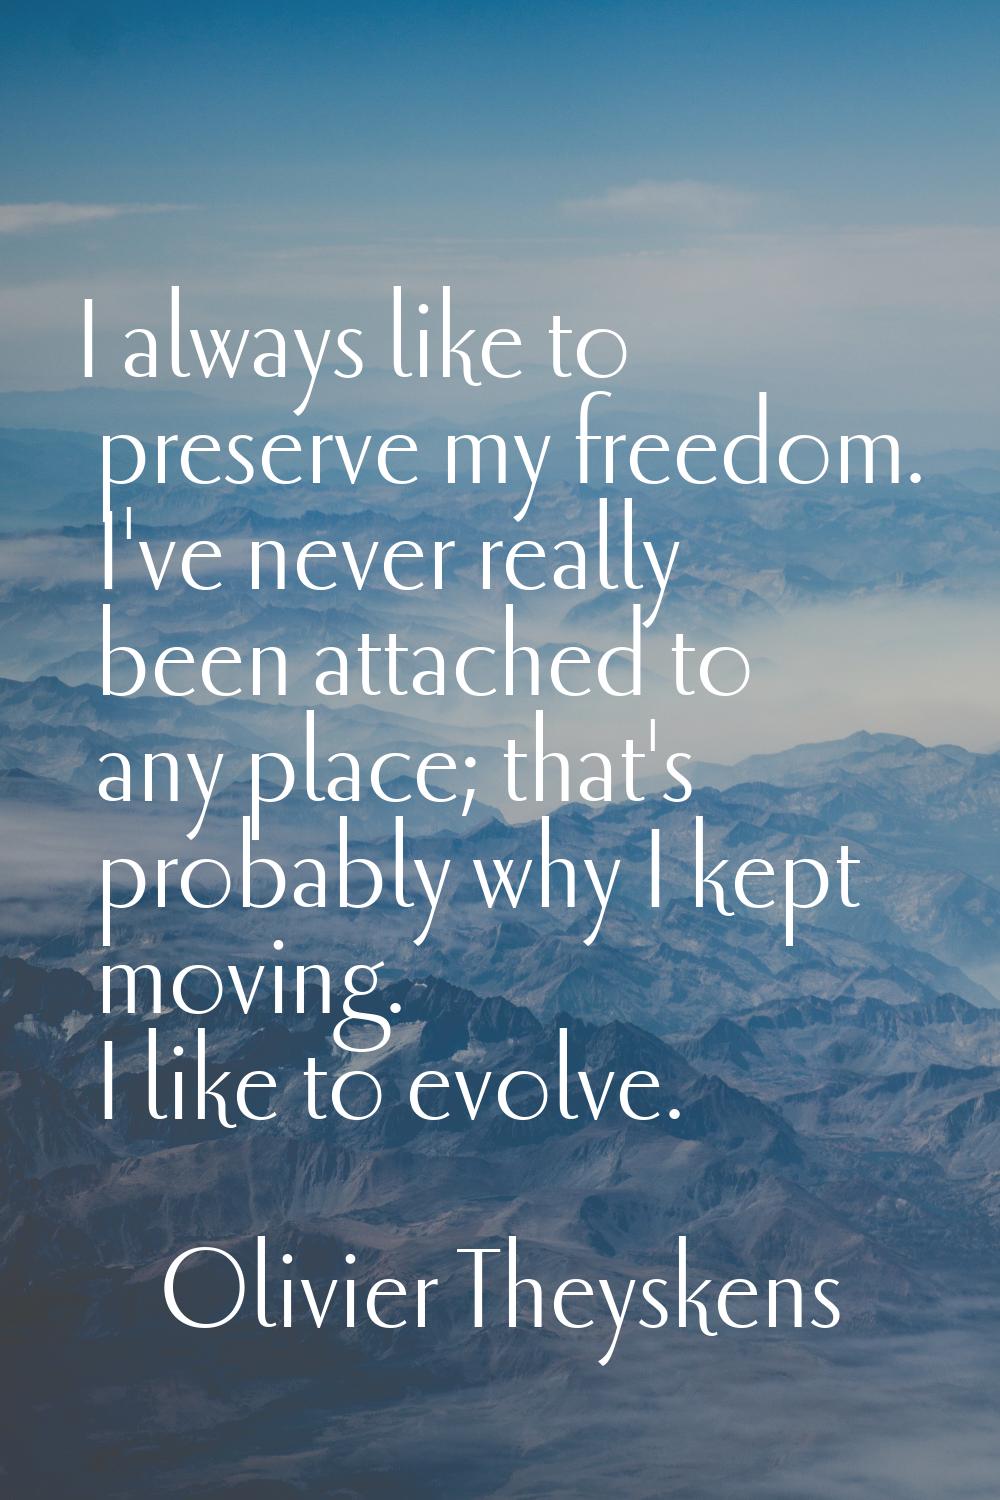 I always like to preserve my freedom. I've never really been attached to any place; that's probably